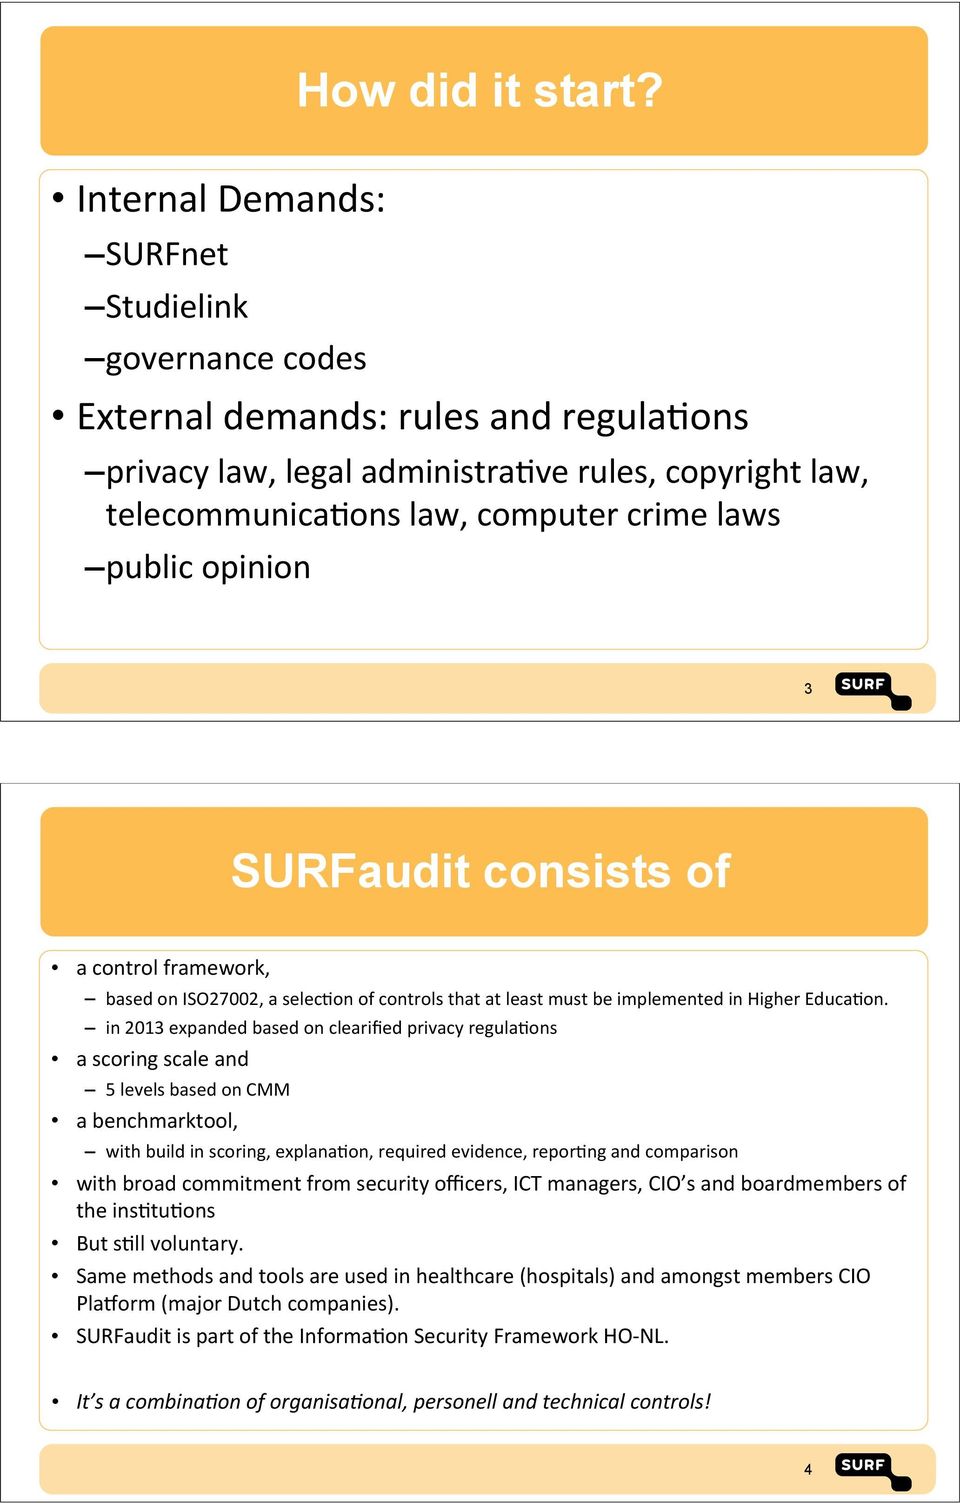 public&opinion 3 SURFaudit consists of a&control&framework, based&on&iso27002,&a&selec@on&of&controls&that&at&least&must&be&implemented&in&higher&educa@on.